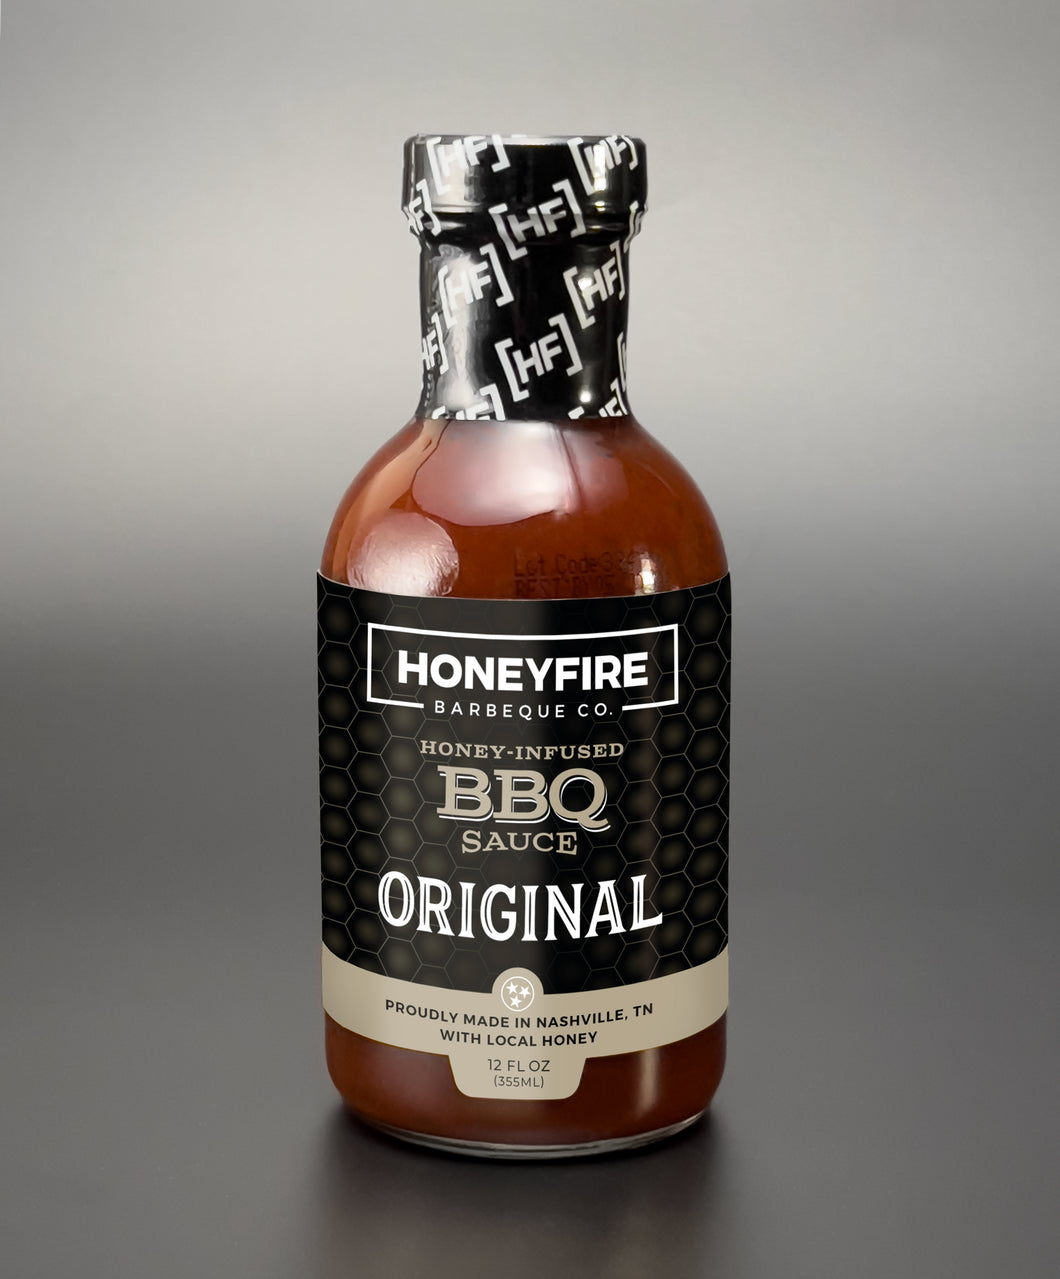 Made with real Tennessee honey with the ideal balance of sweet and tangy flavors, our Original Sauce can be used on pork, beef, poultry, fish, or as a topping on your favorite veggies.